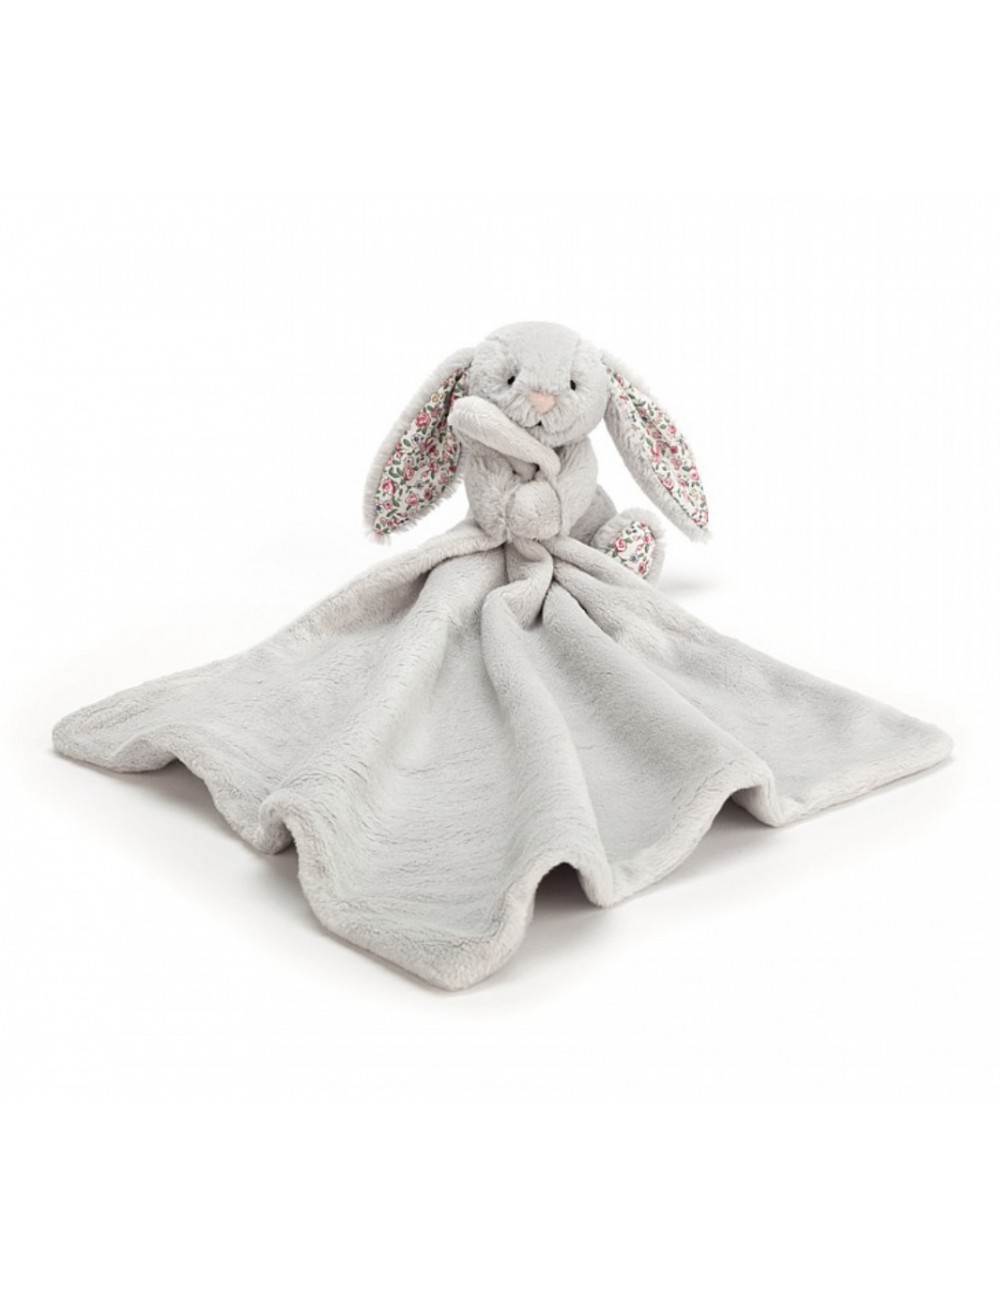 Blossom silver bunny soother lapin gris liberty mouchoir